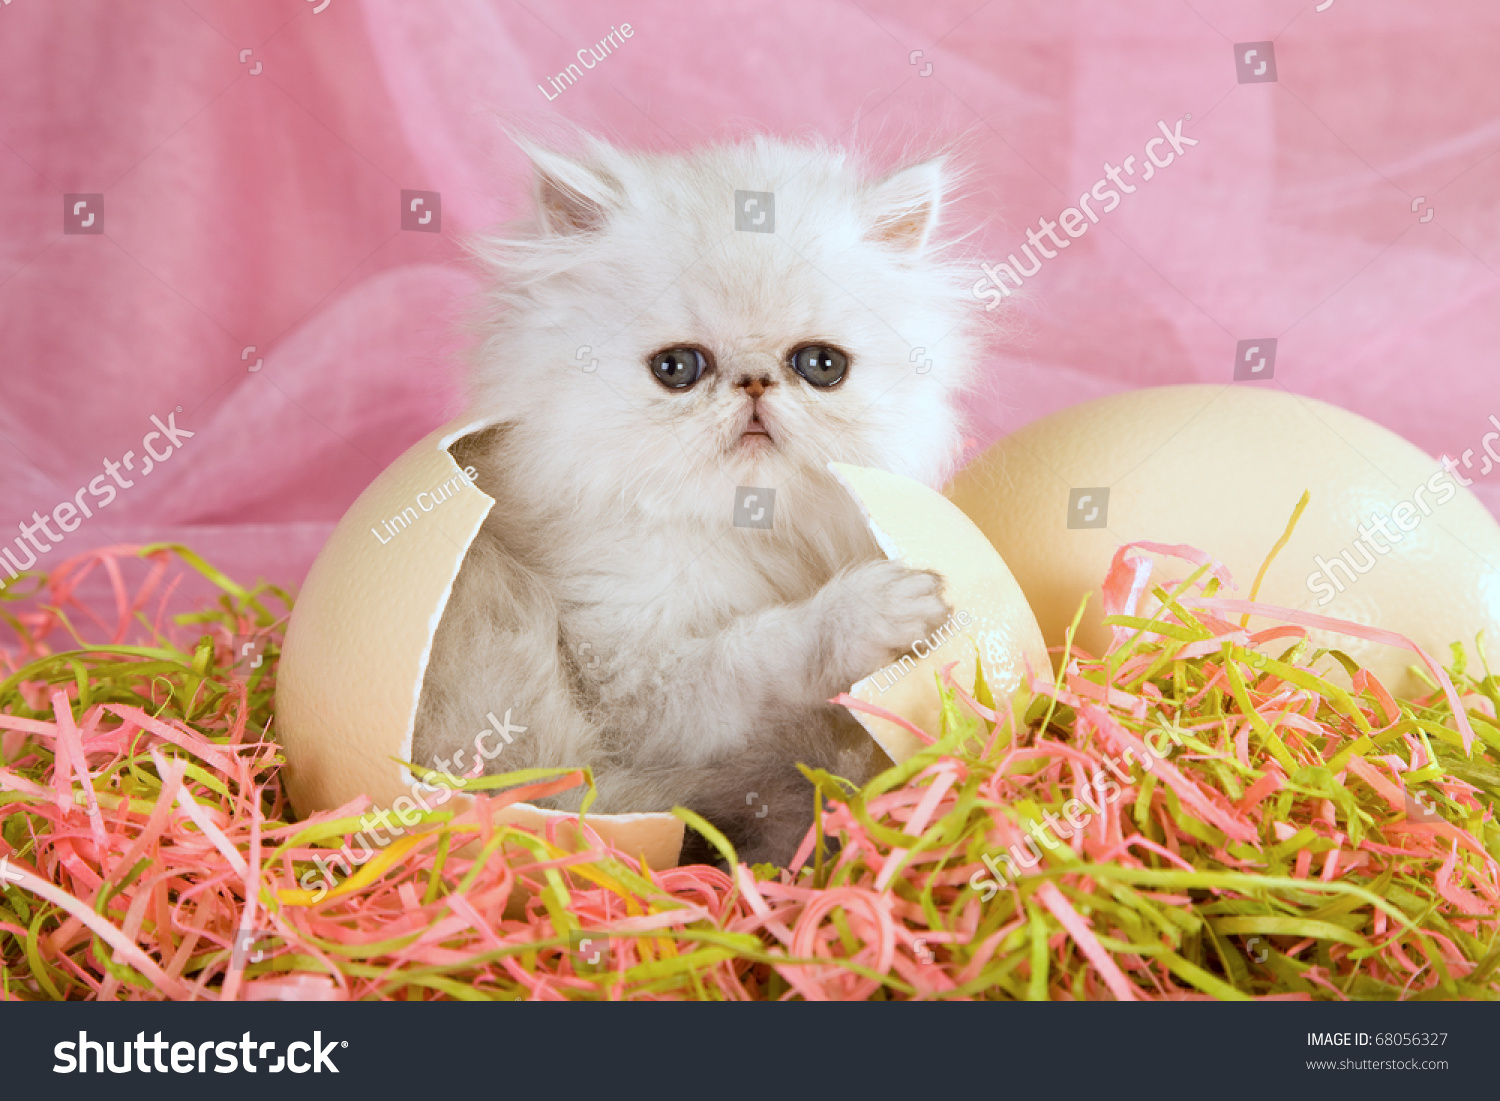 stock-photo-easter-silver-chinchilla-persian-kitten-hatched-from-ostrich-egg-on-straw-68056327.jpg